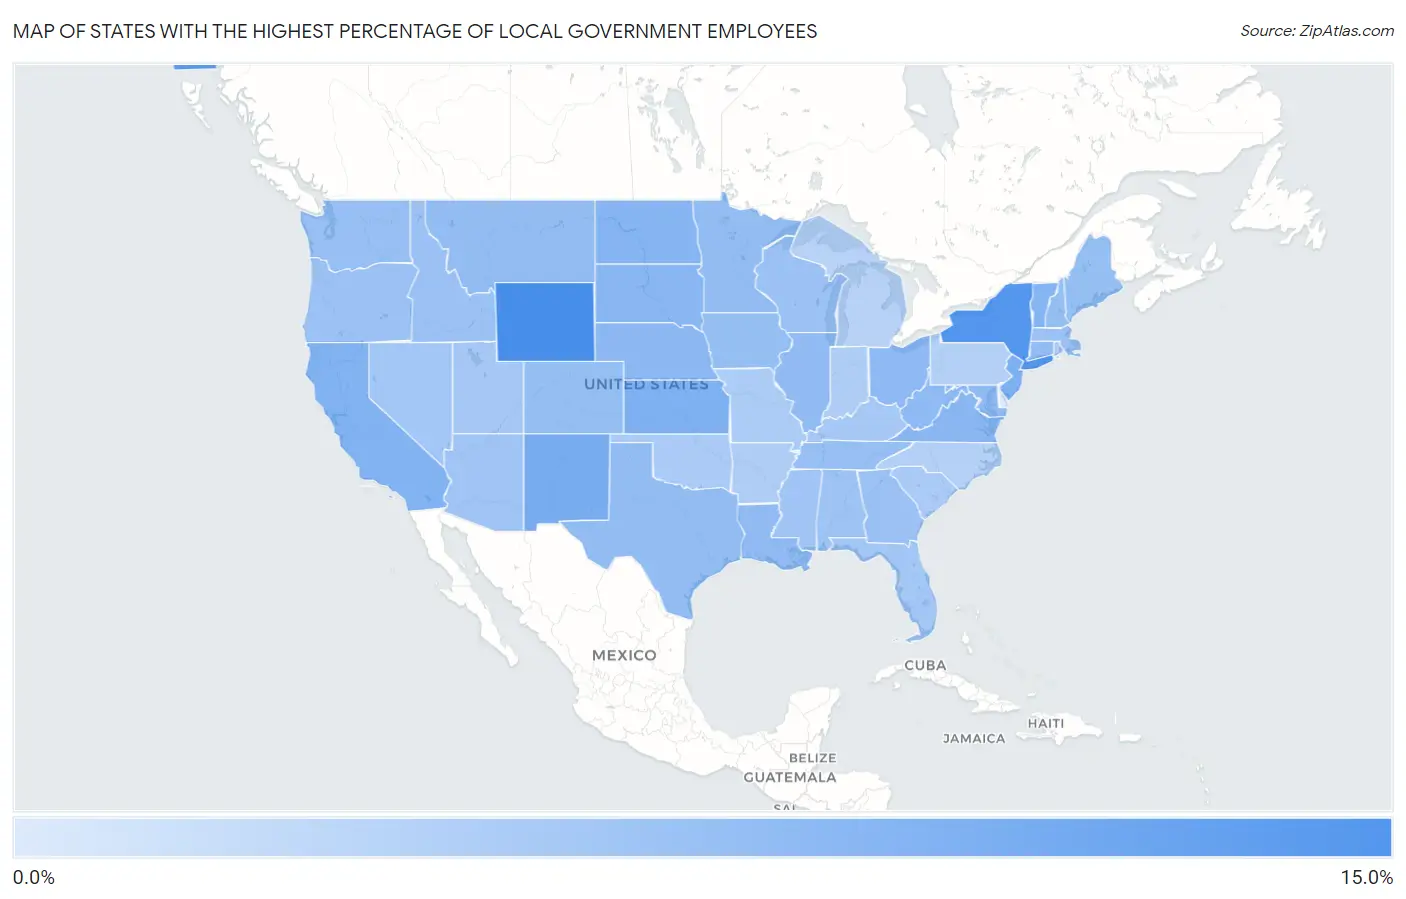 States with the Highest Percentage of Local Government Employees in the United States Map